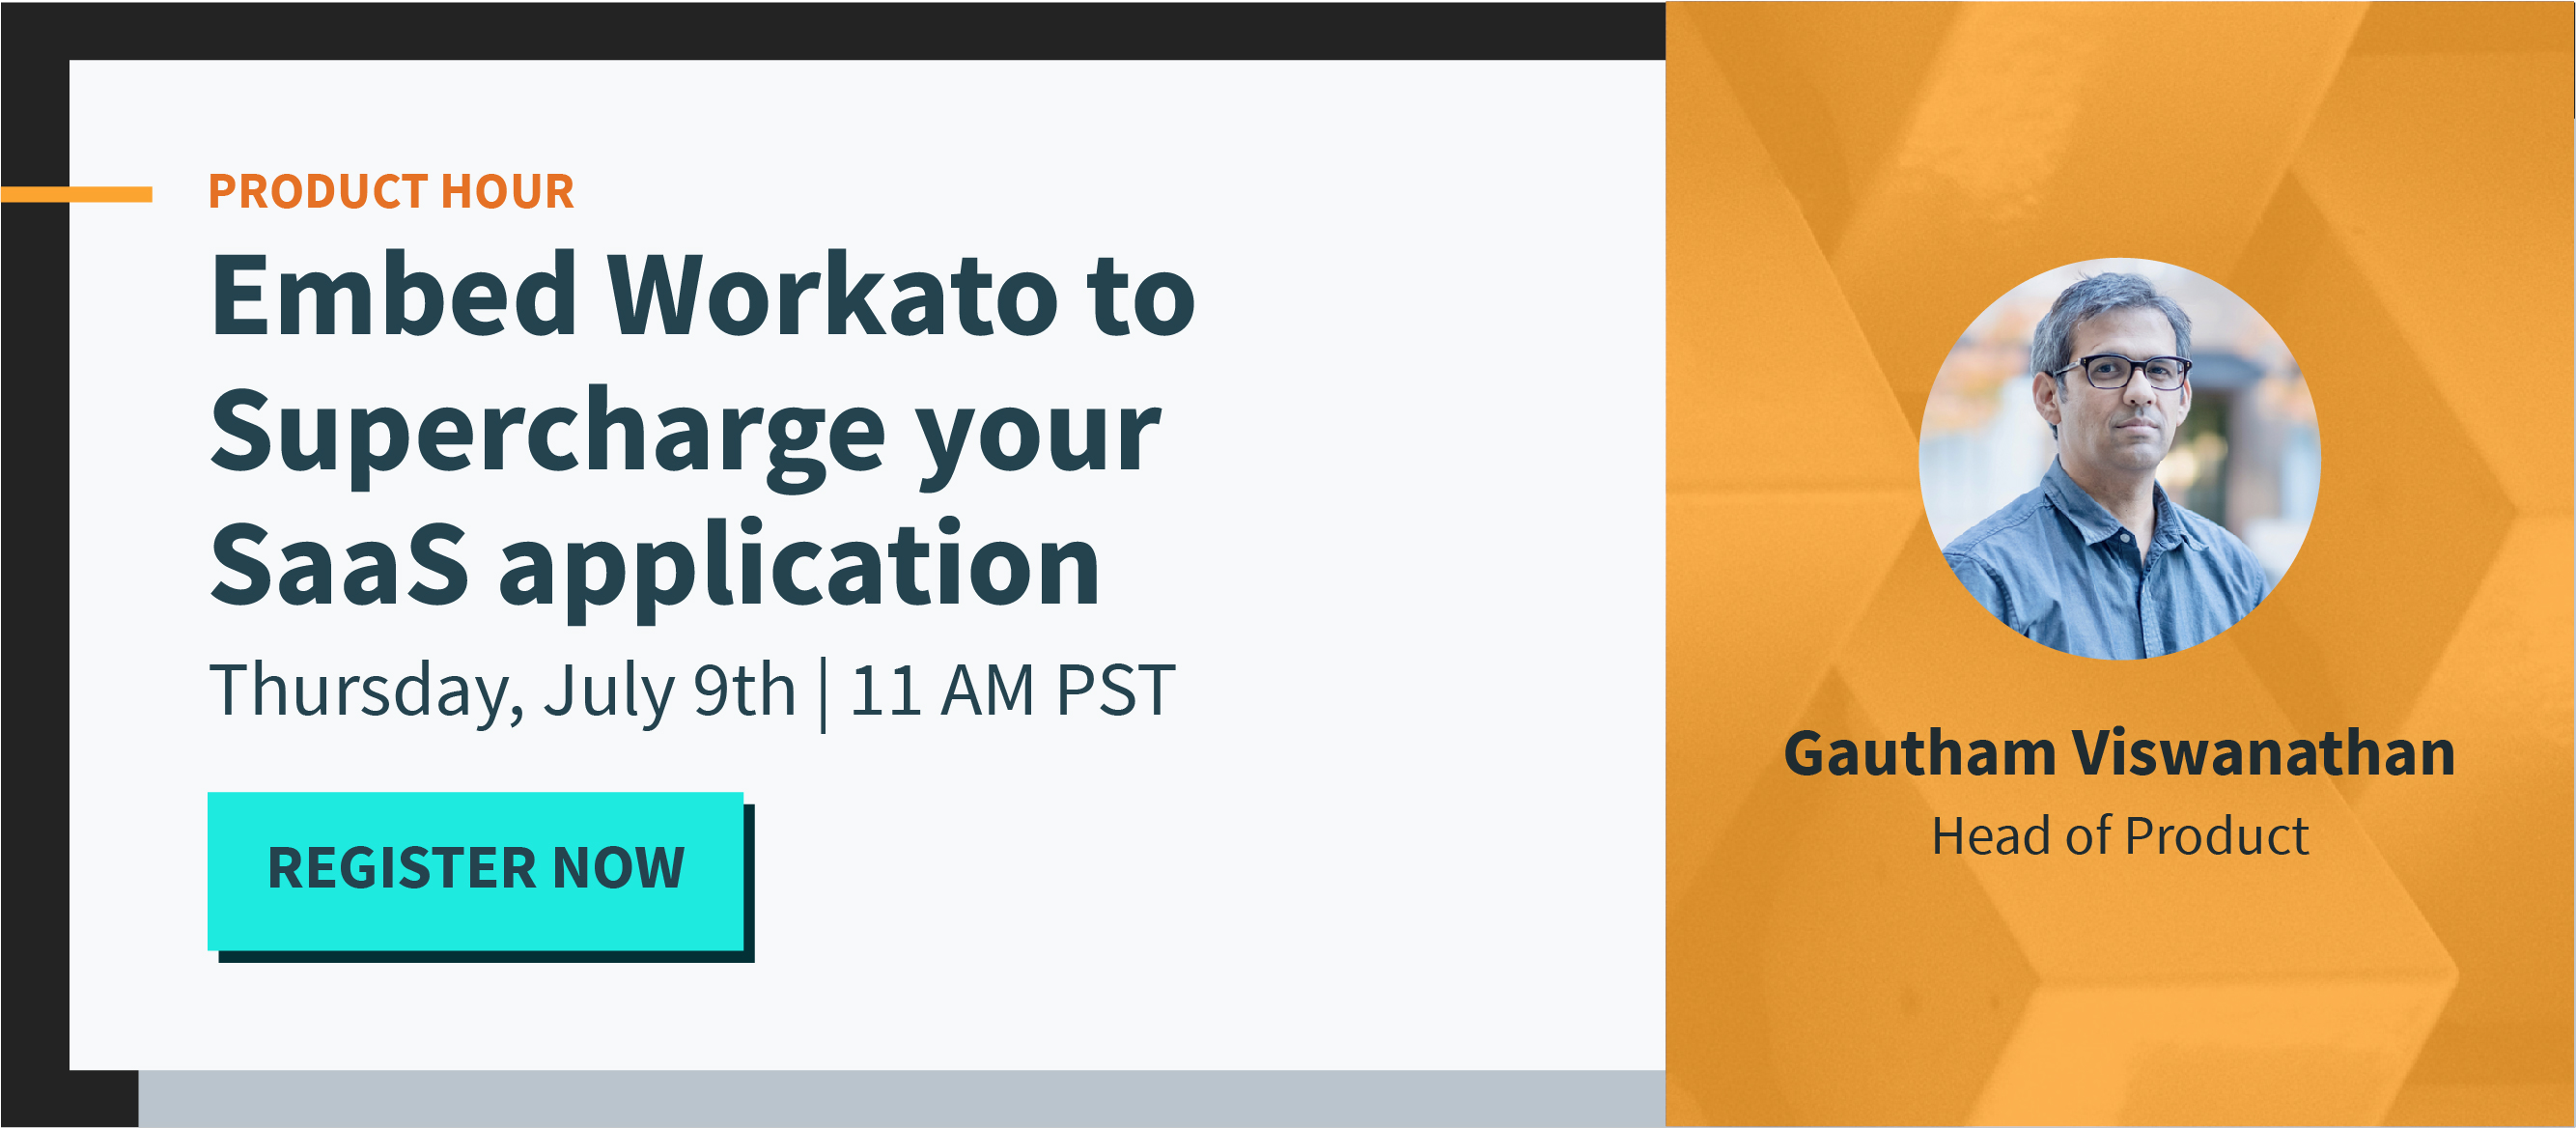 workato-webinar-ProductHour-Embed Workato to Supercharge your SaaS application-20200625-bl-01_email-register.jpg